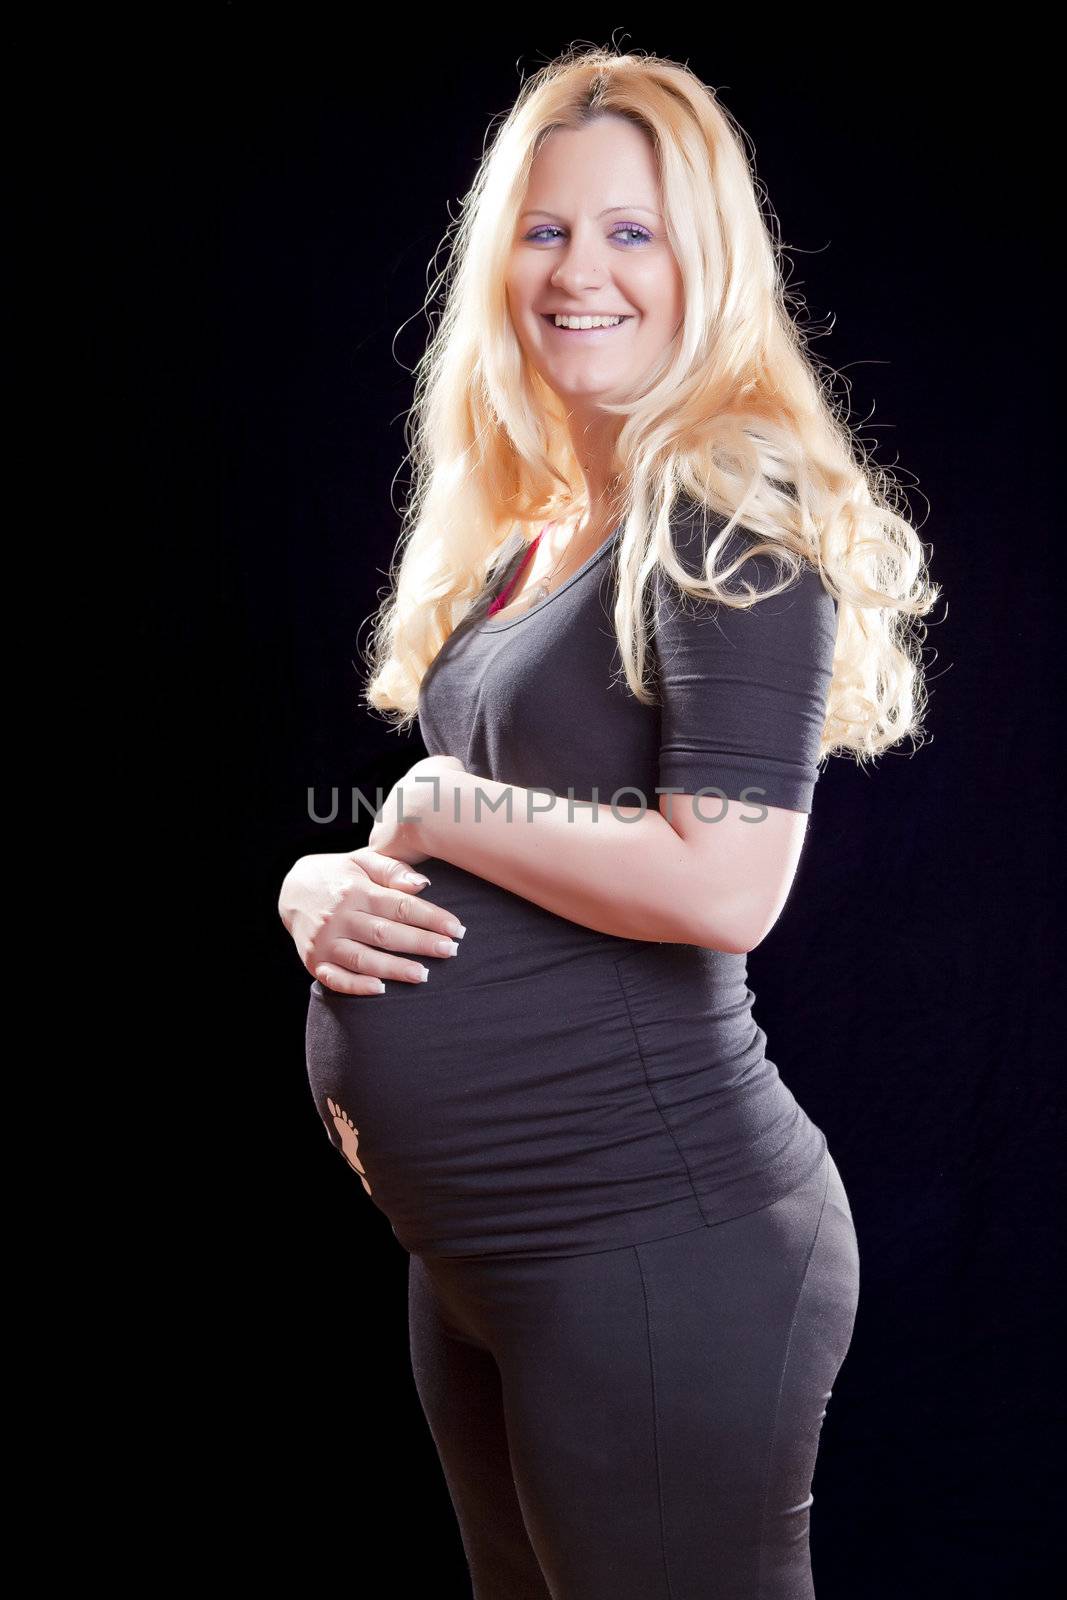 Pregnant woman holding tummy by adamr